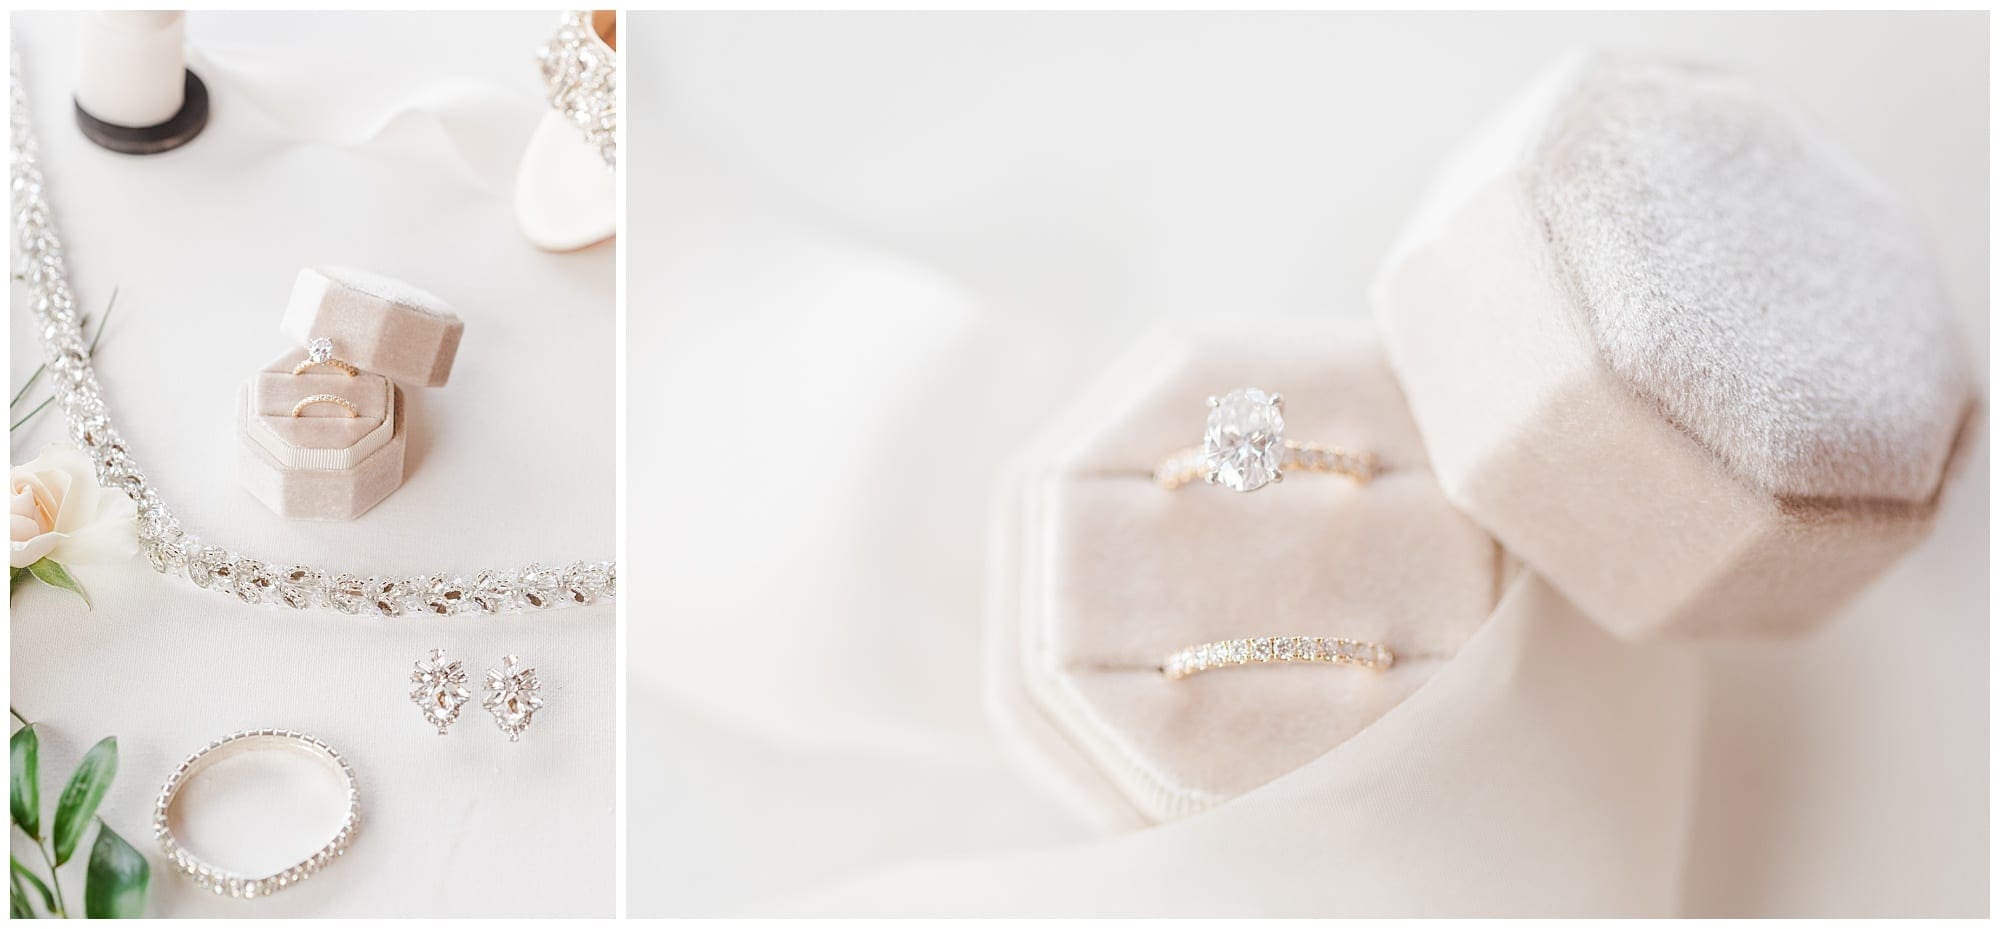 brides rings and jewlry